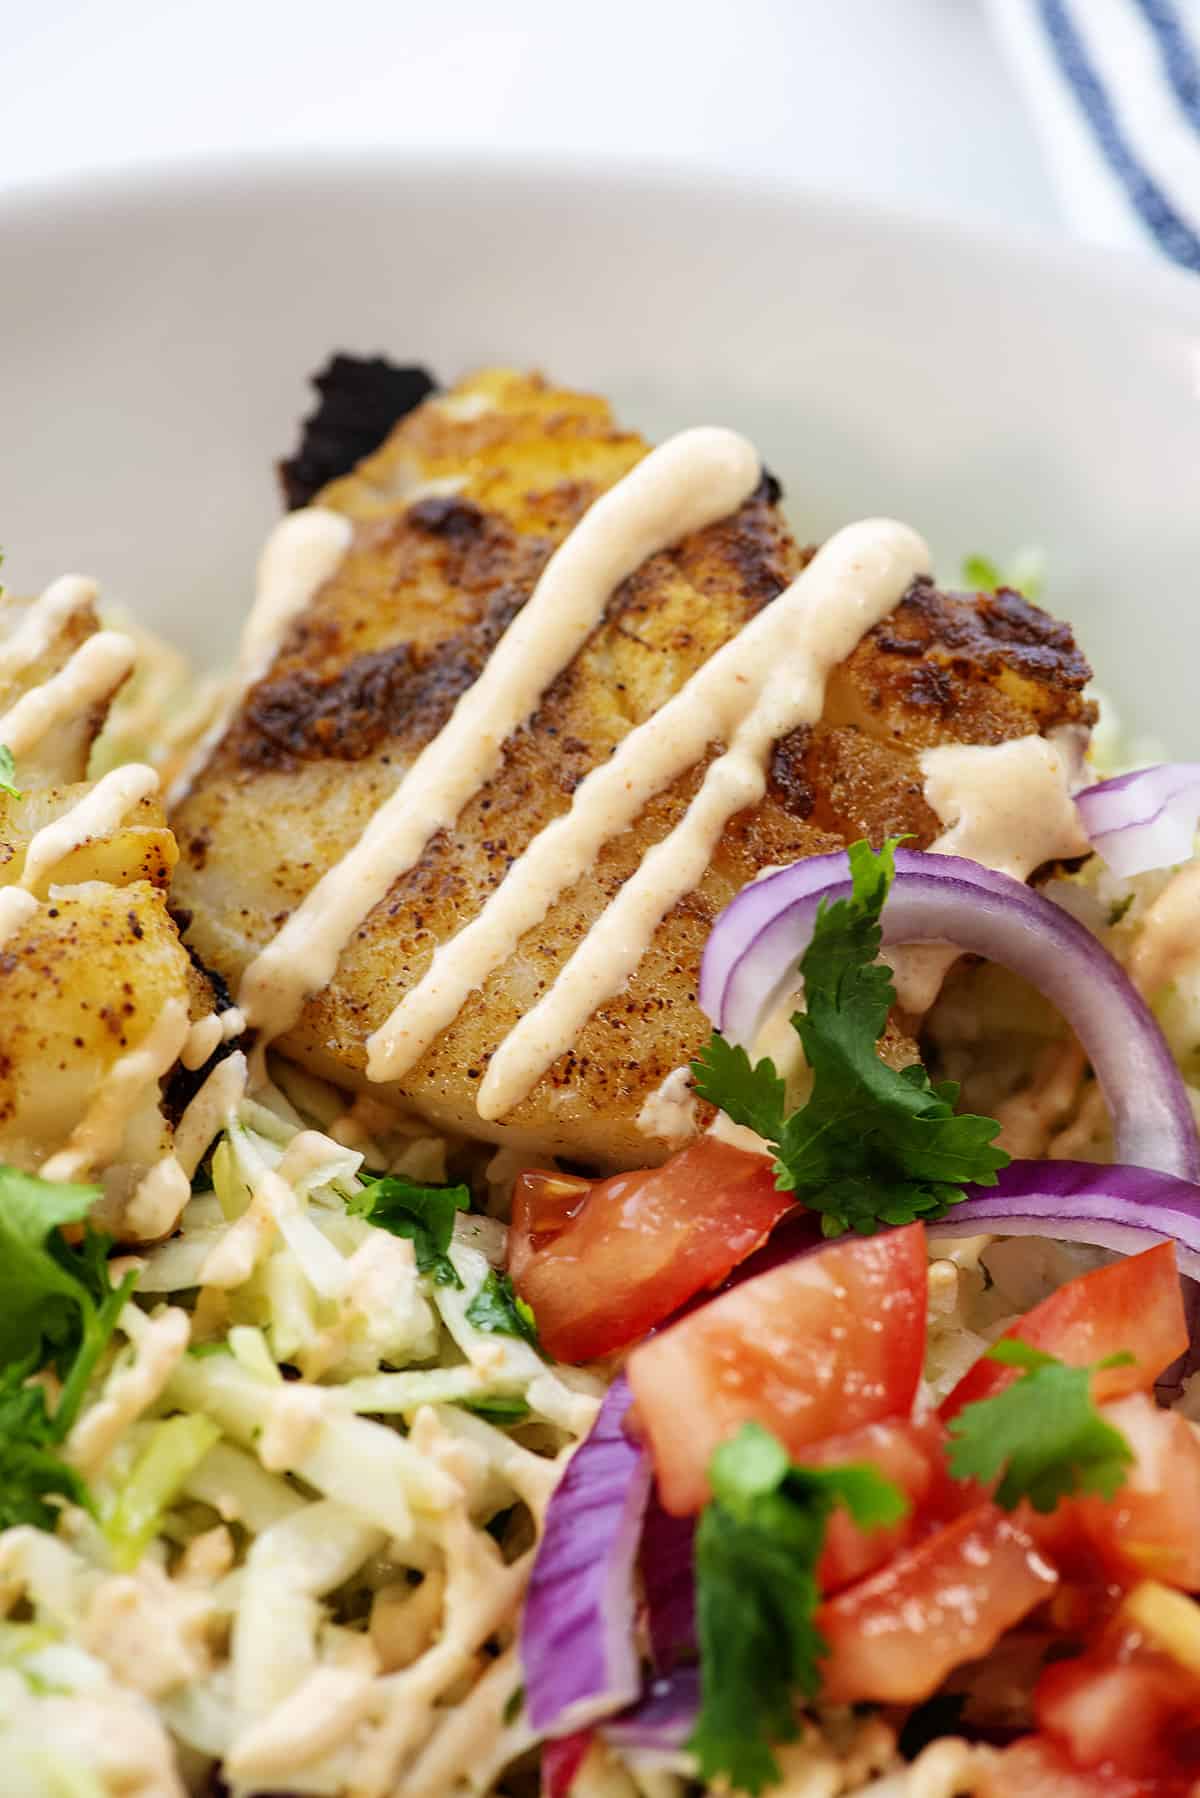 fish drizzled with sauce in bowl with slaw and tomatoes.